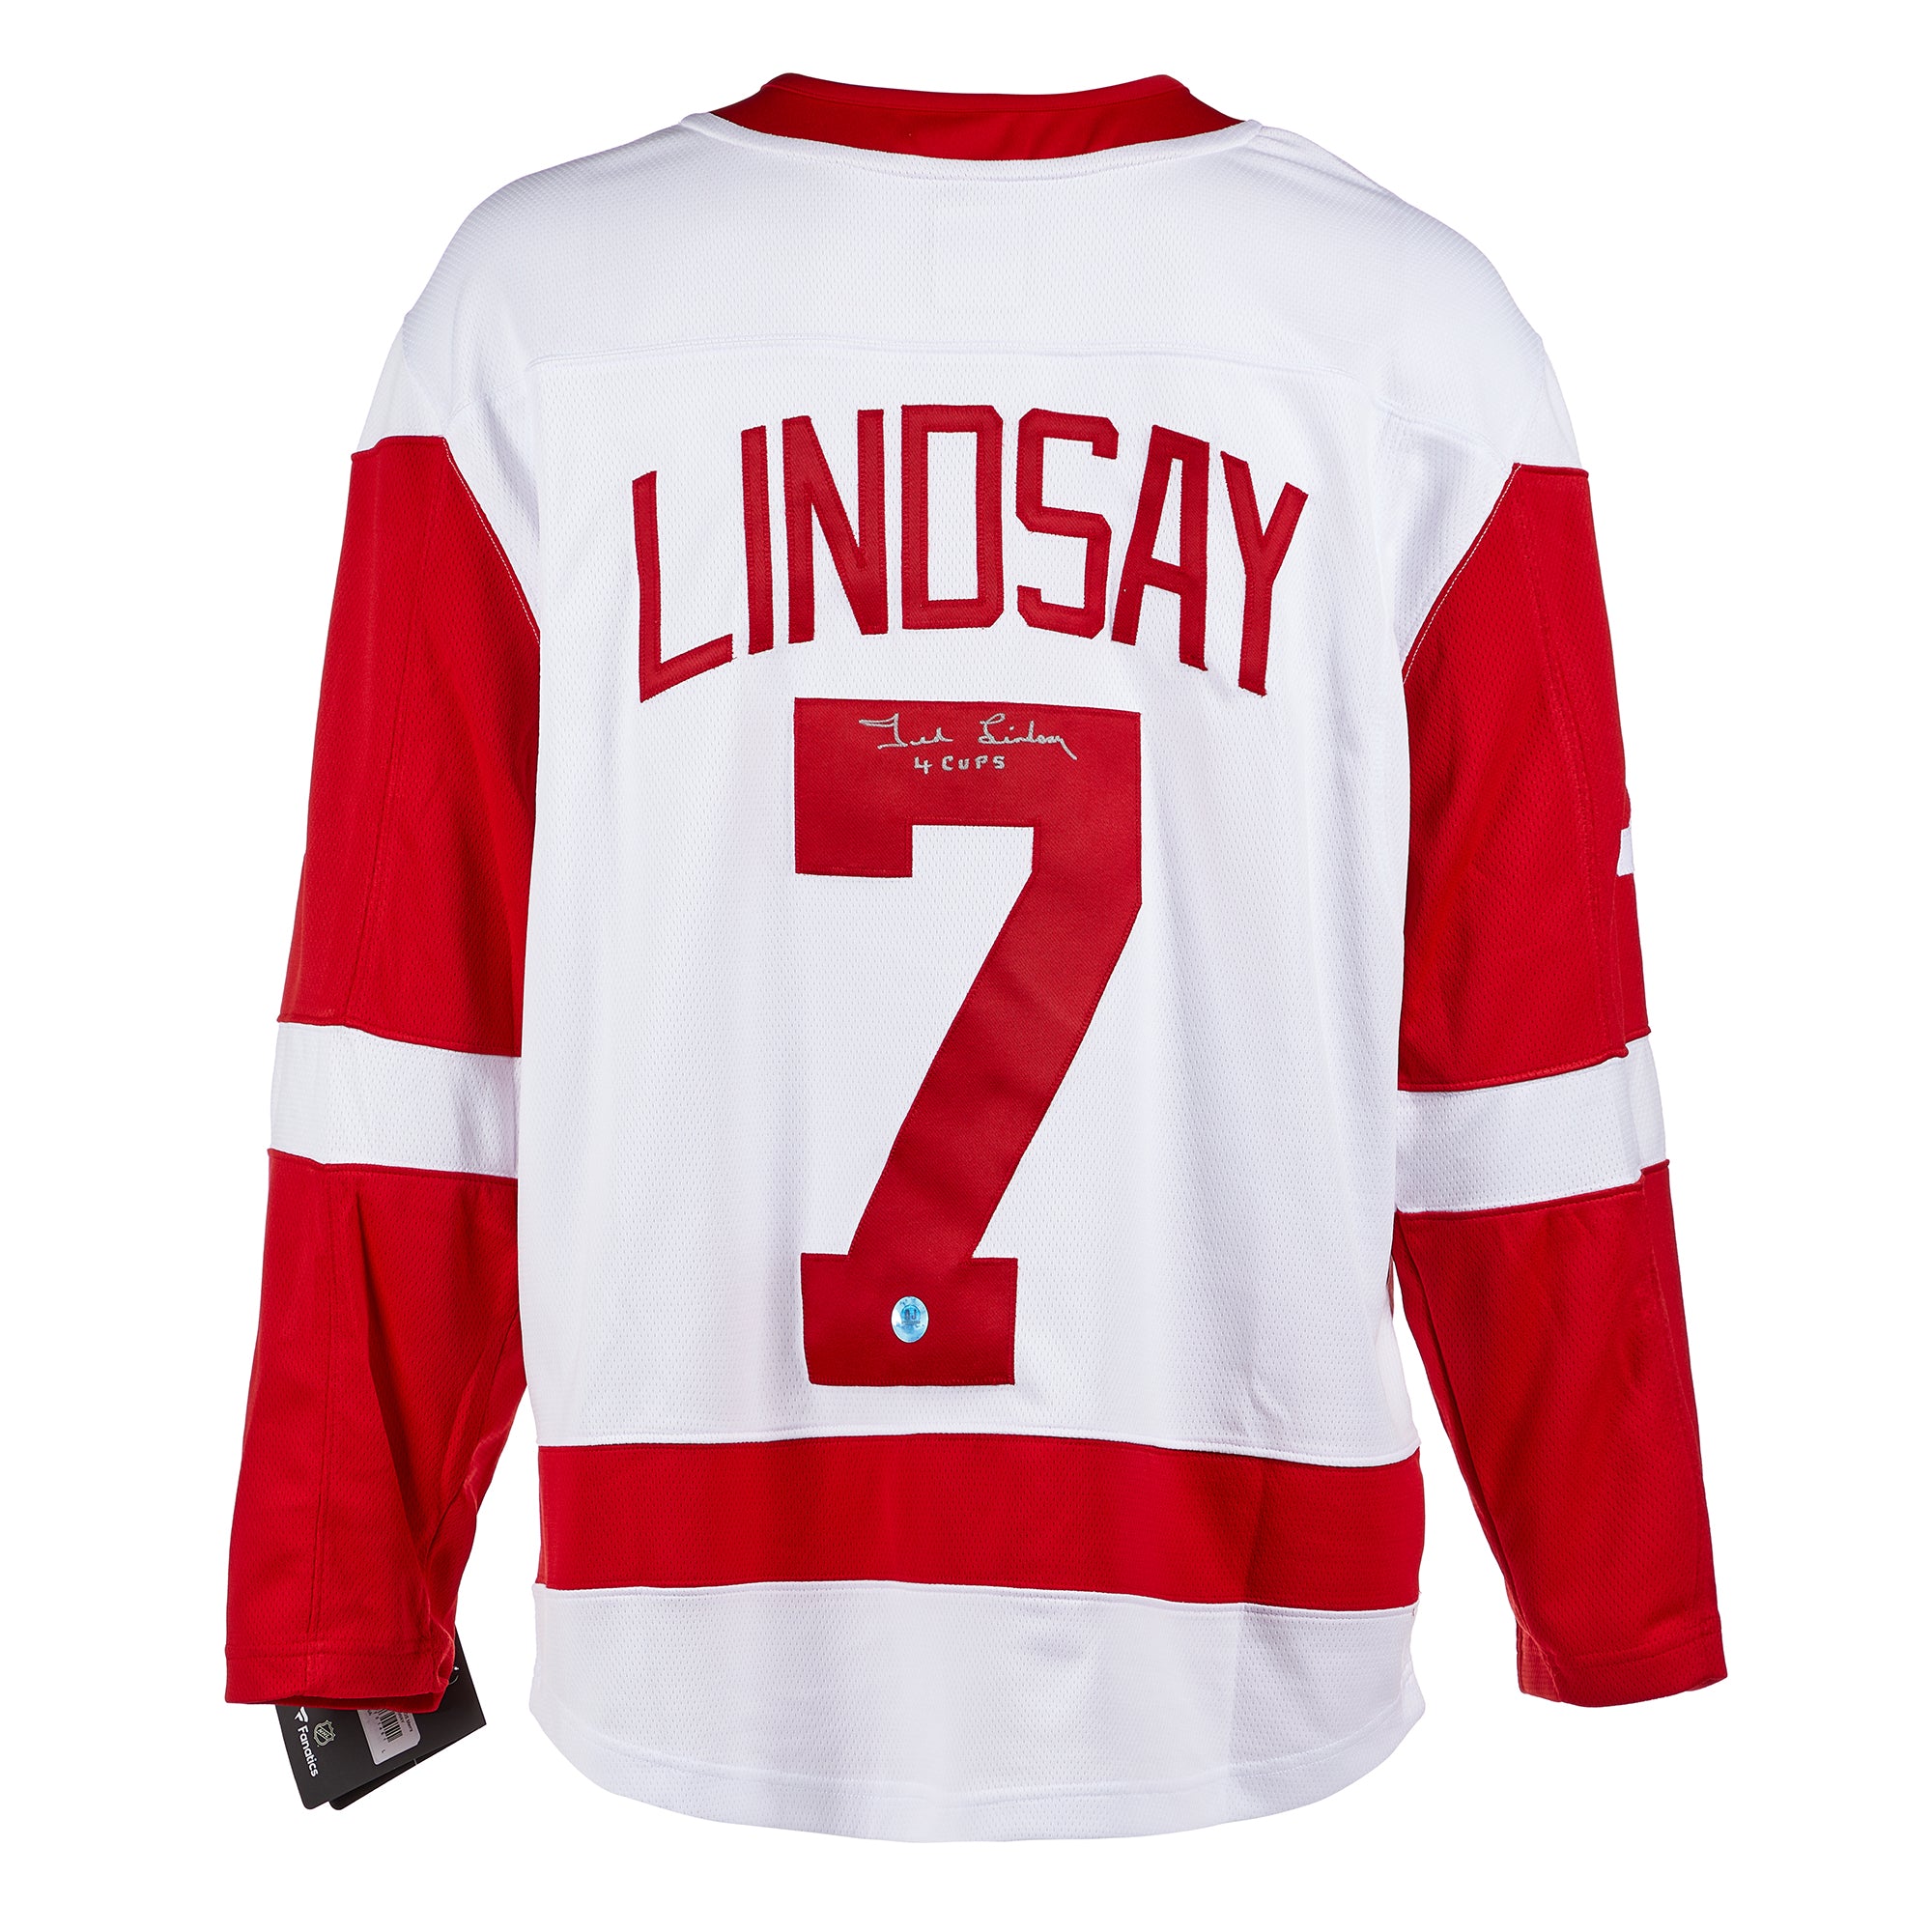 Manny Legace Detroit Red Wings Autographed Signed Fanatics Jersey